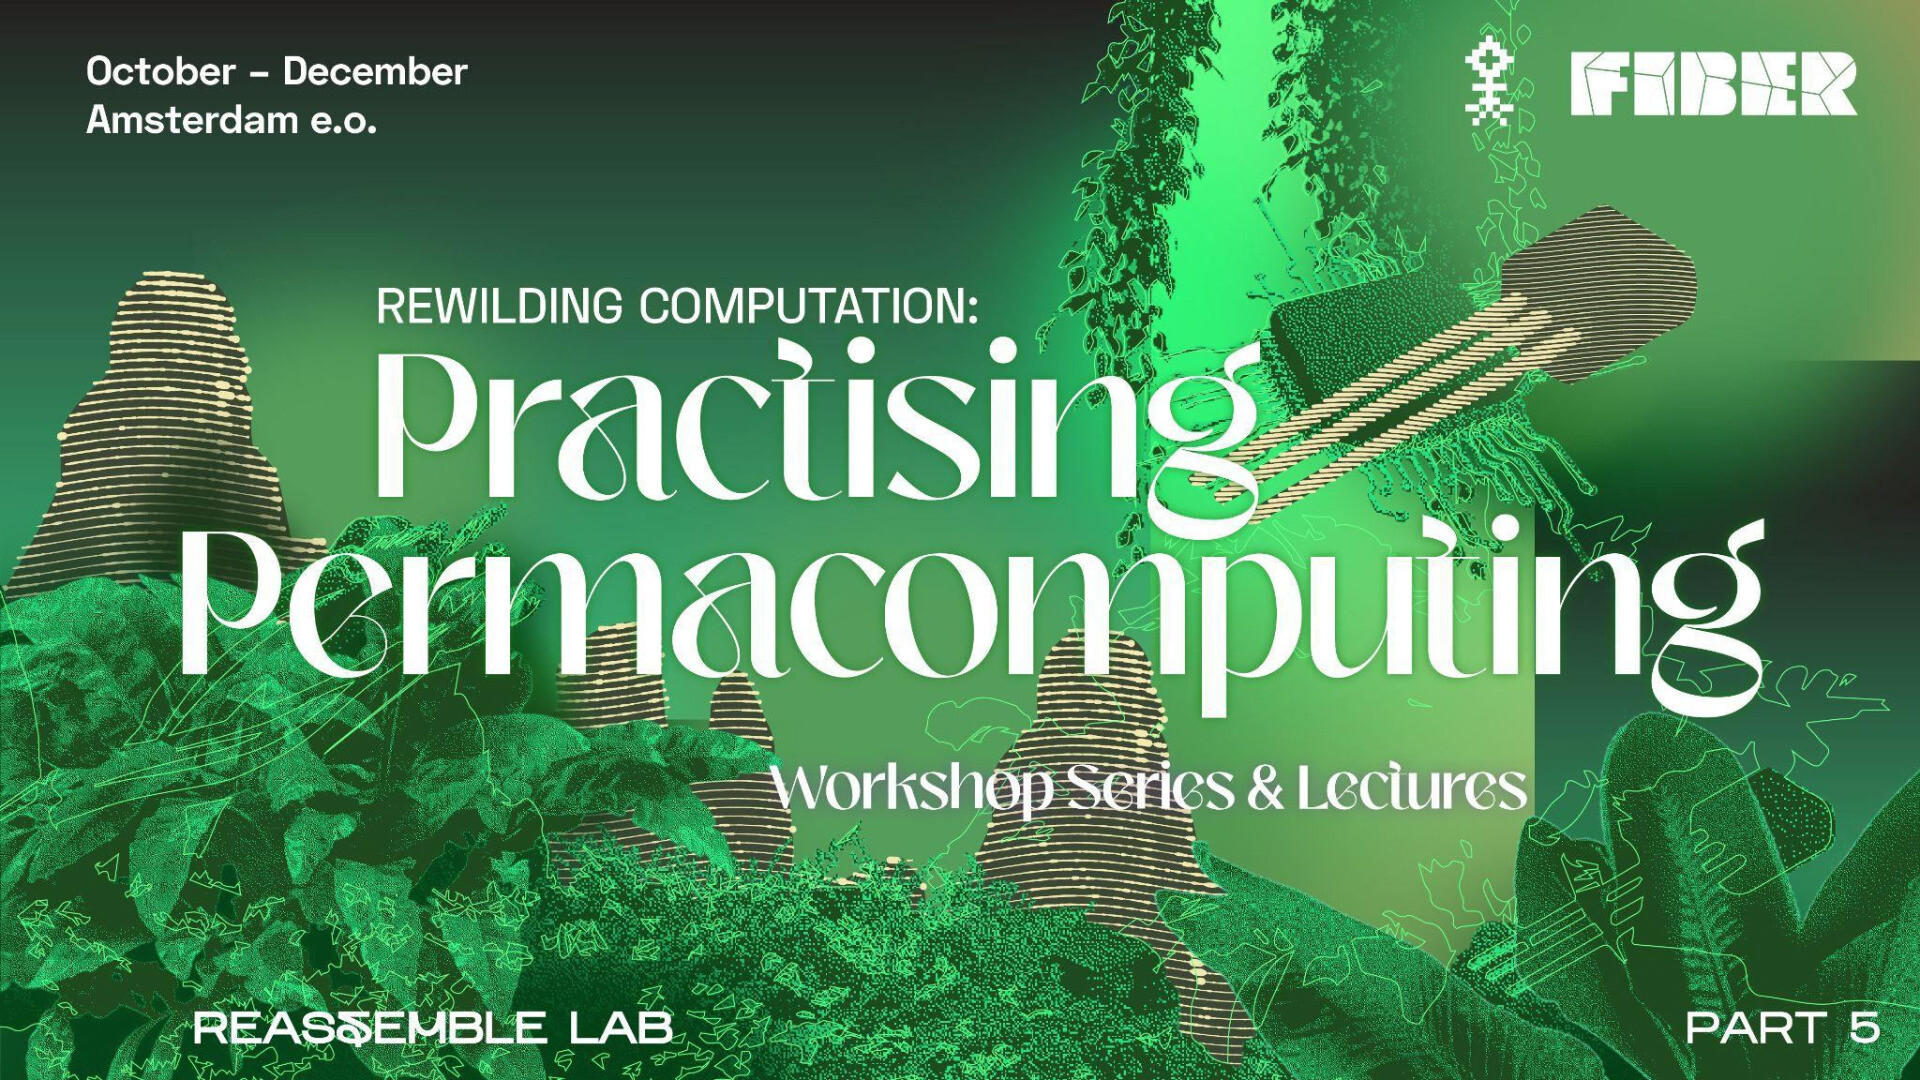 Rewilding Computation: Practising Permacomputing Flyer of the workshop series and event. It's a duotone image dominantly green with some some plants, a chip, and a transistor.